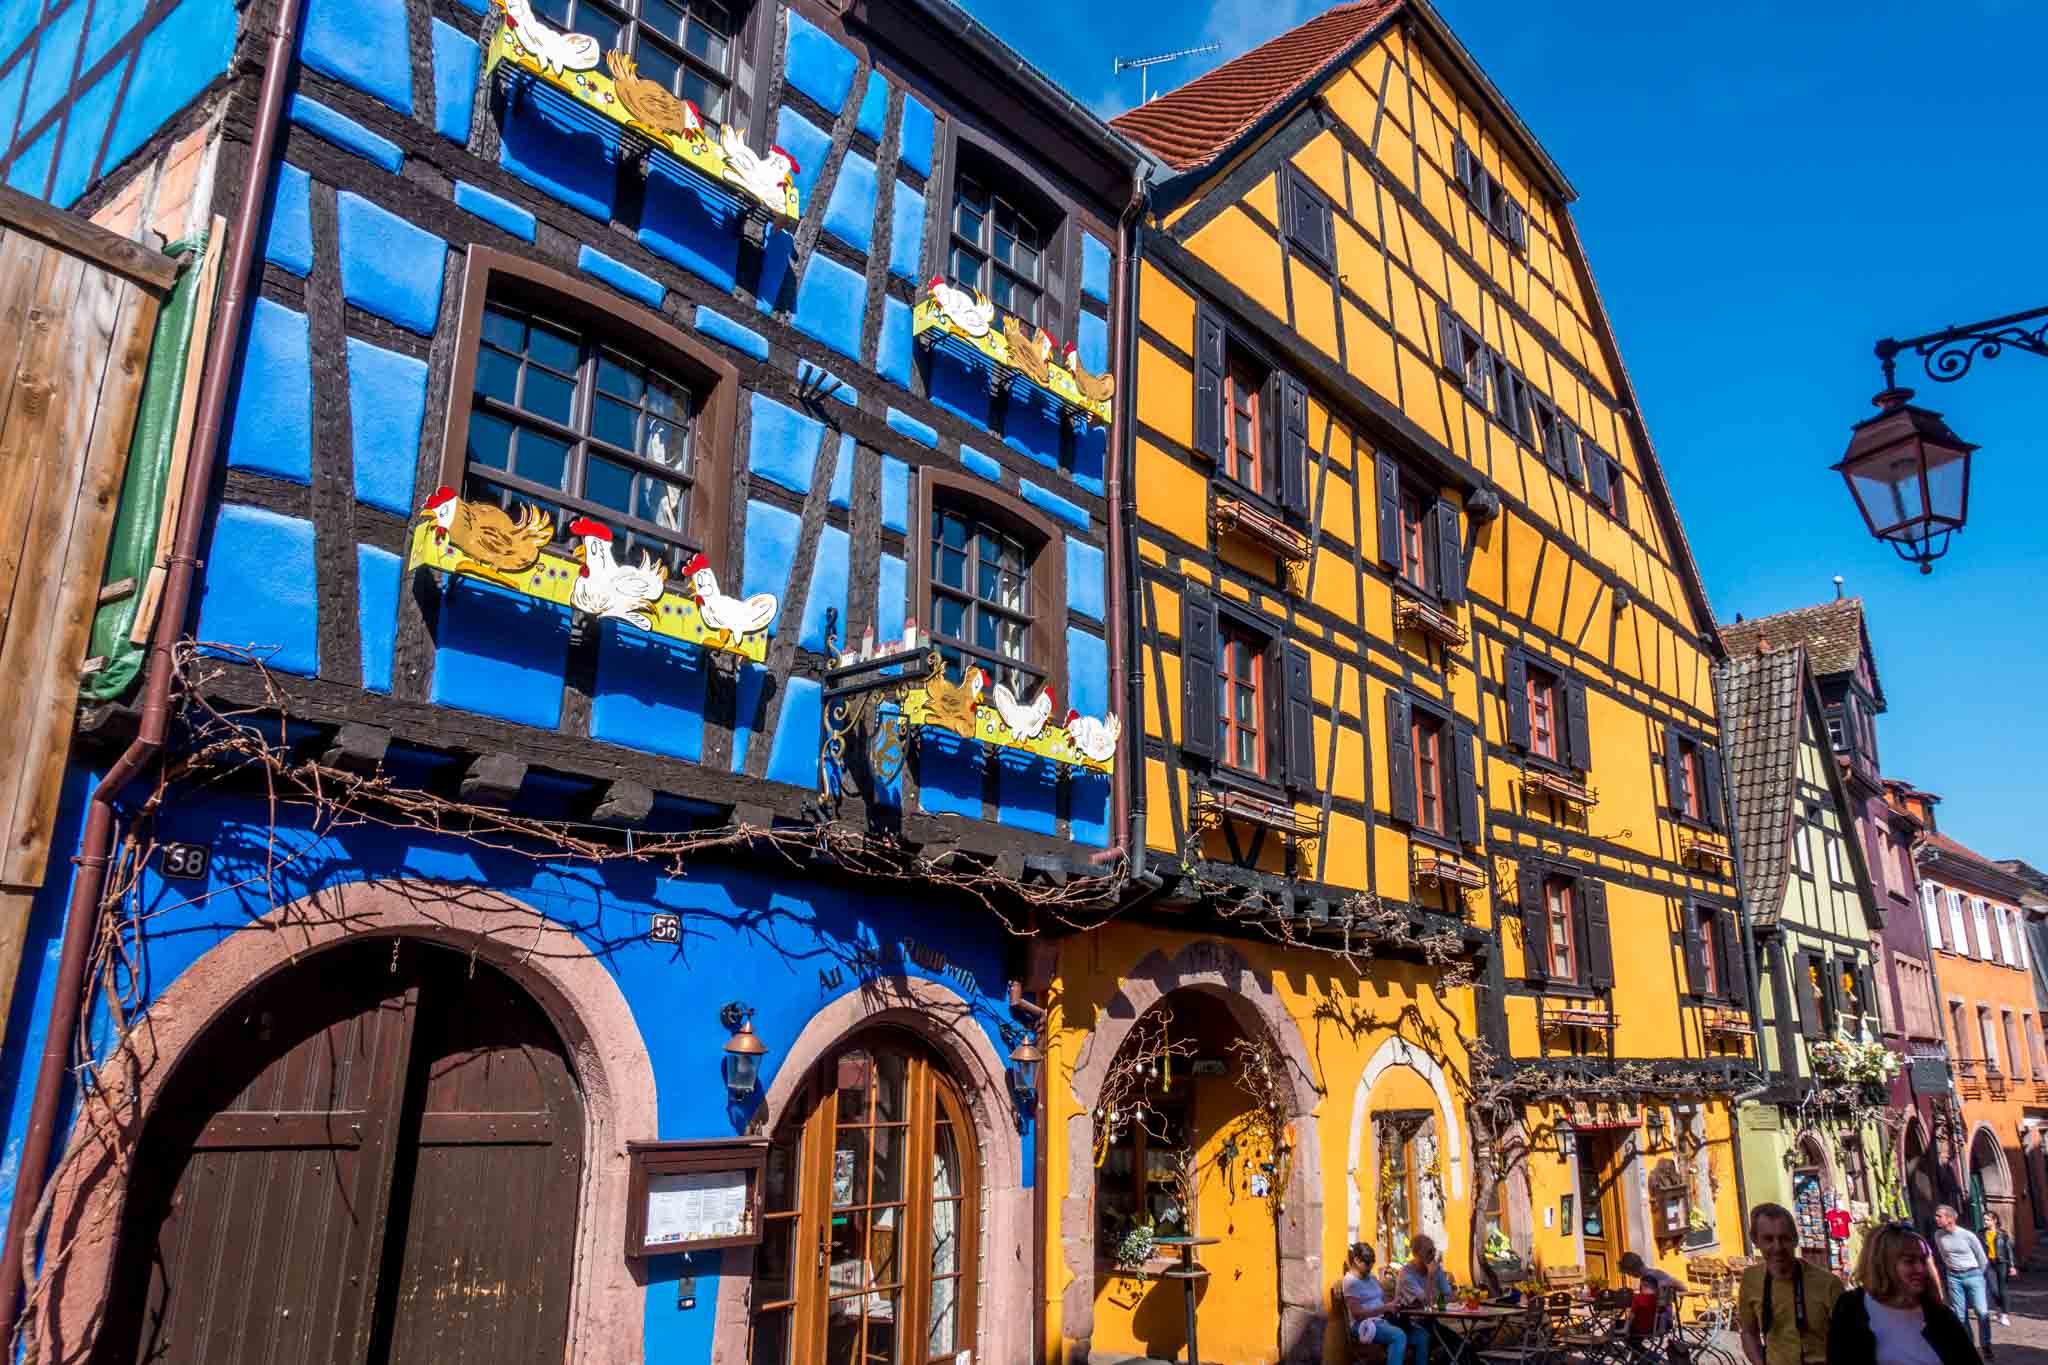 Medieval buildings decorated with spring theme.